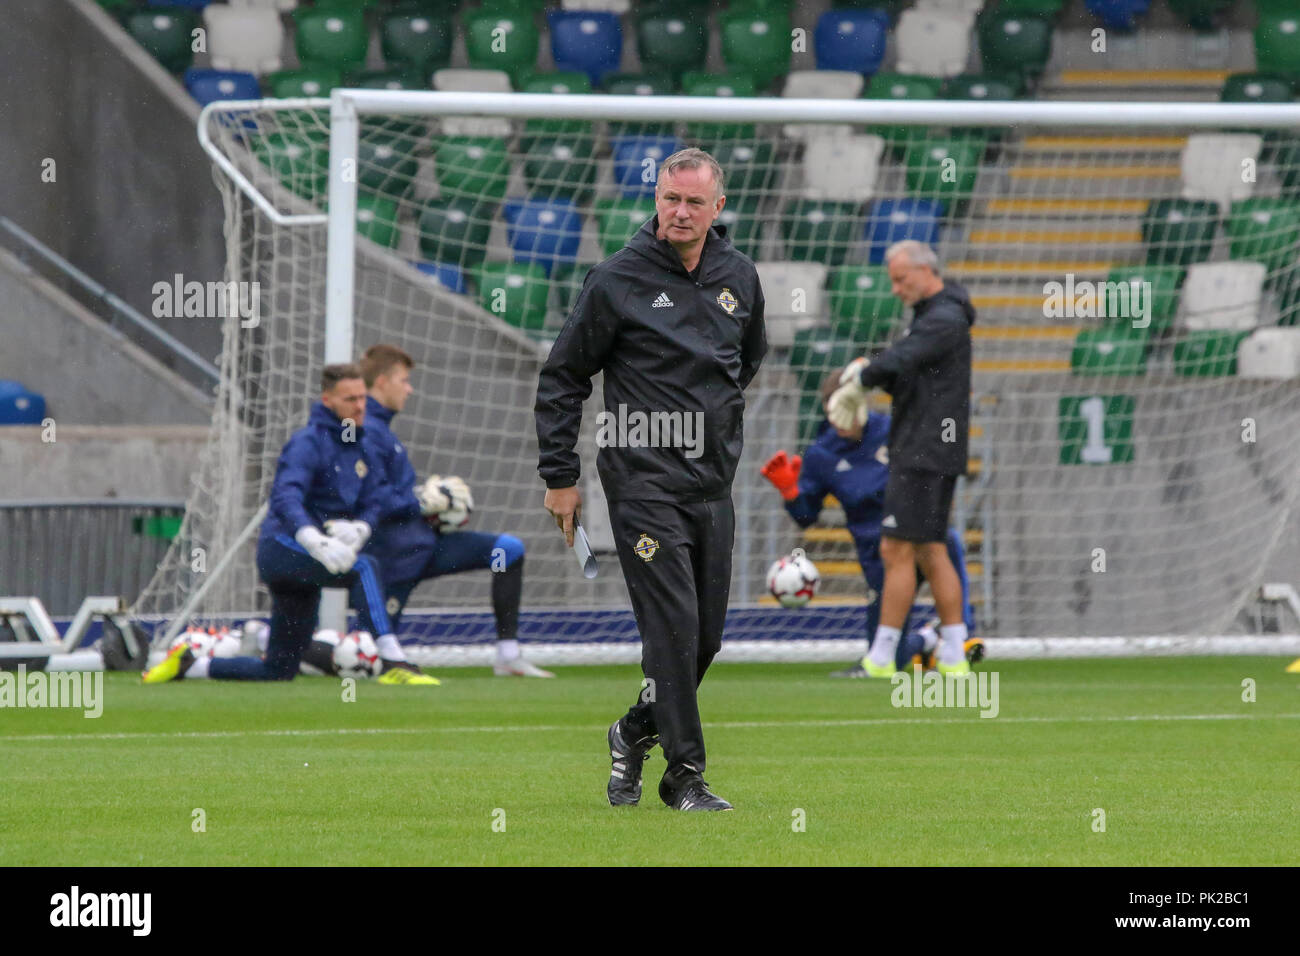 Windsor Park, Belfast, Northern Ireland. 10 September 2018. After Saturday's defeat in the UEFA Nations League, Northern Ireland returned to training this morning at Windsor Park. Tomorrow night they play Israel in a friendly international. Northern Ireland manager Michael O'Neill at this morning's session. Credit: David Hunter/Alamy Live News. Stock Photo